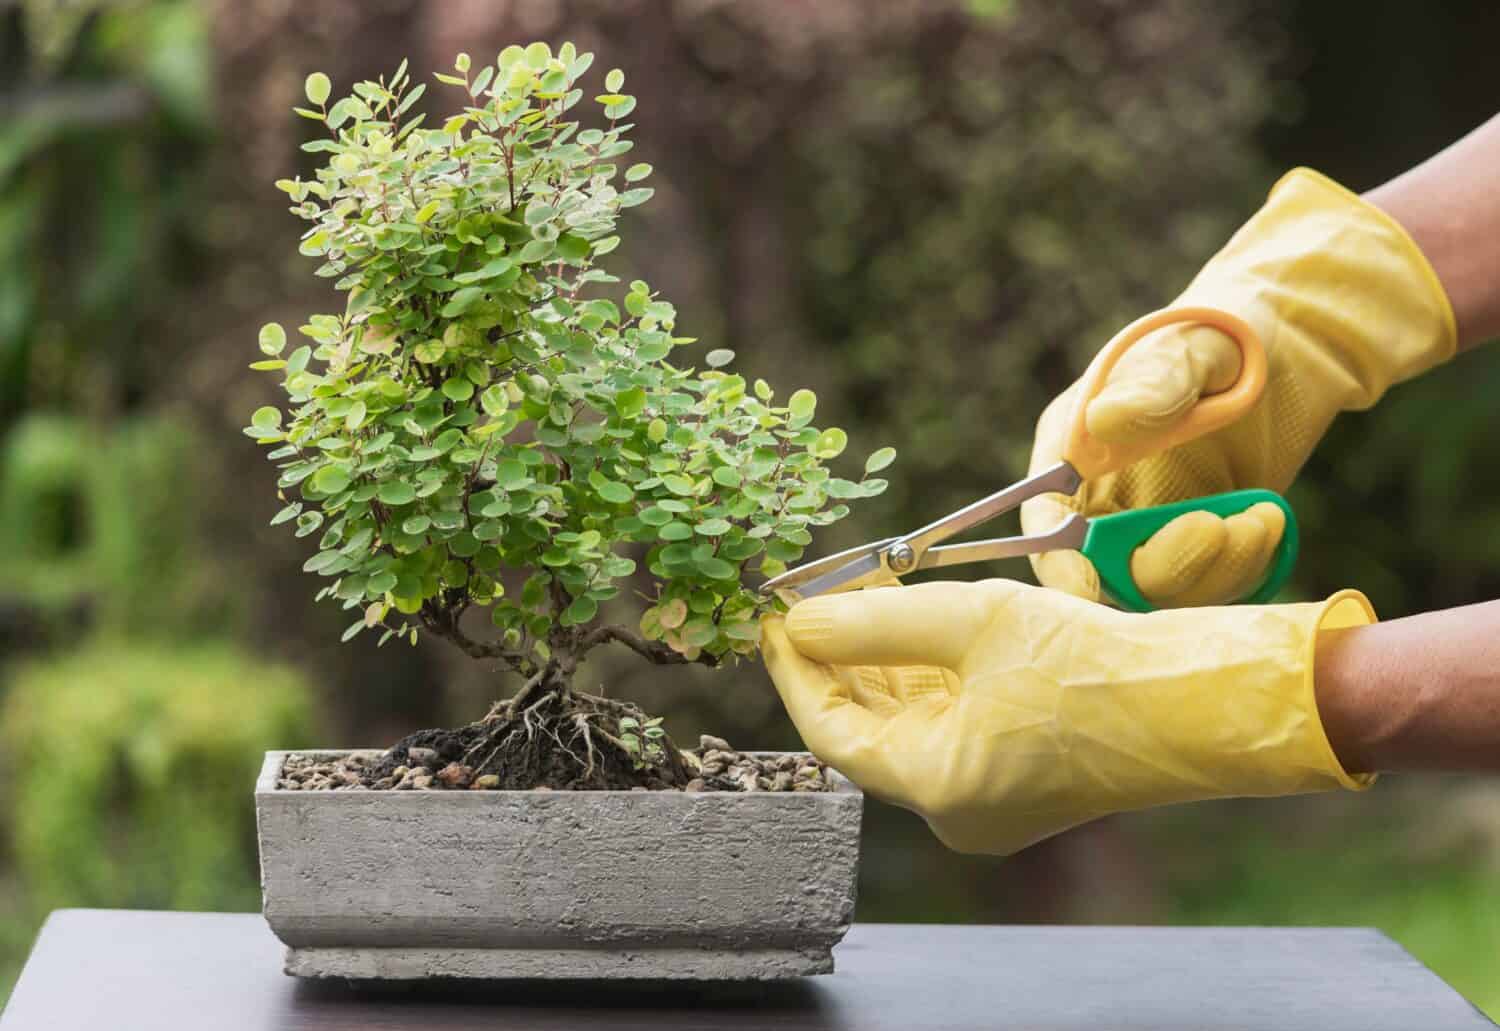 Bonsai trees are great plants for year-round pots.